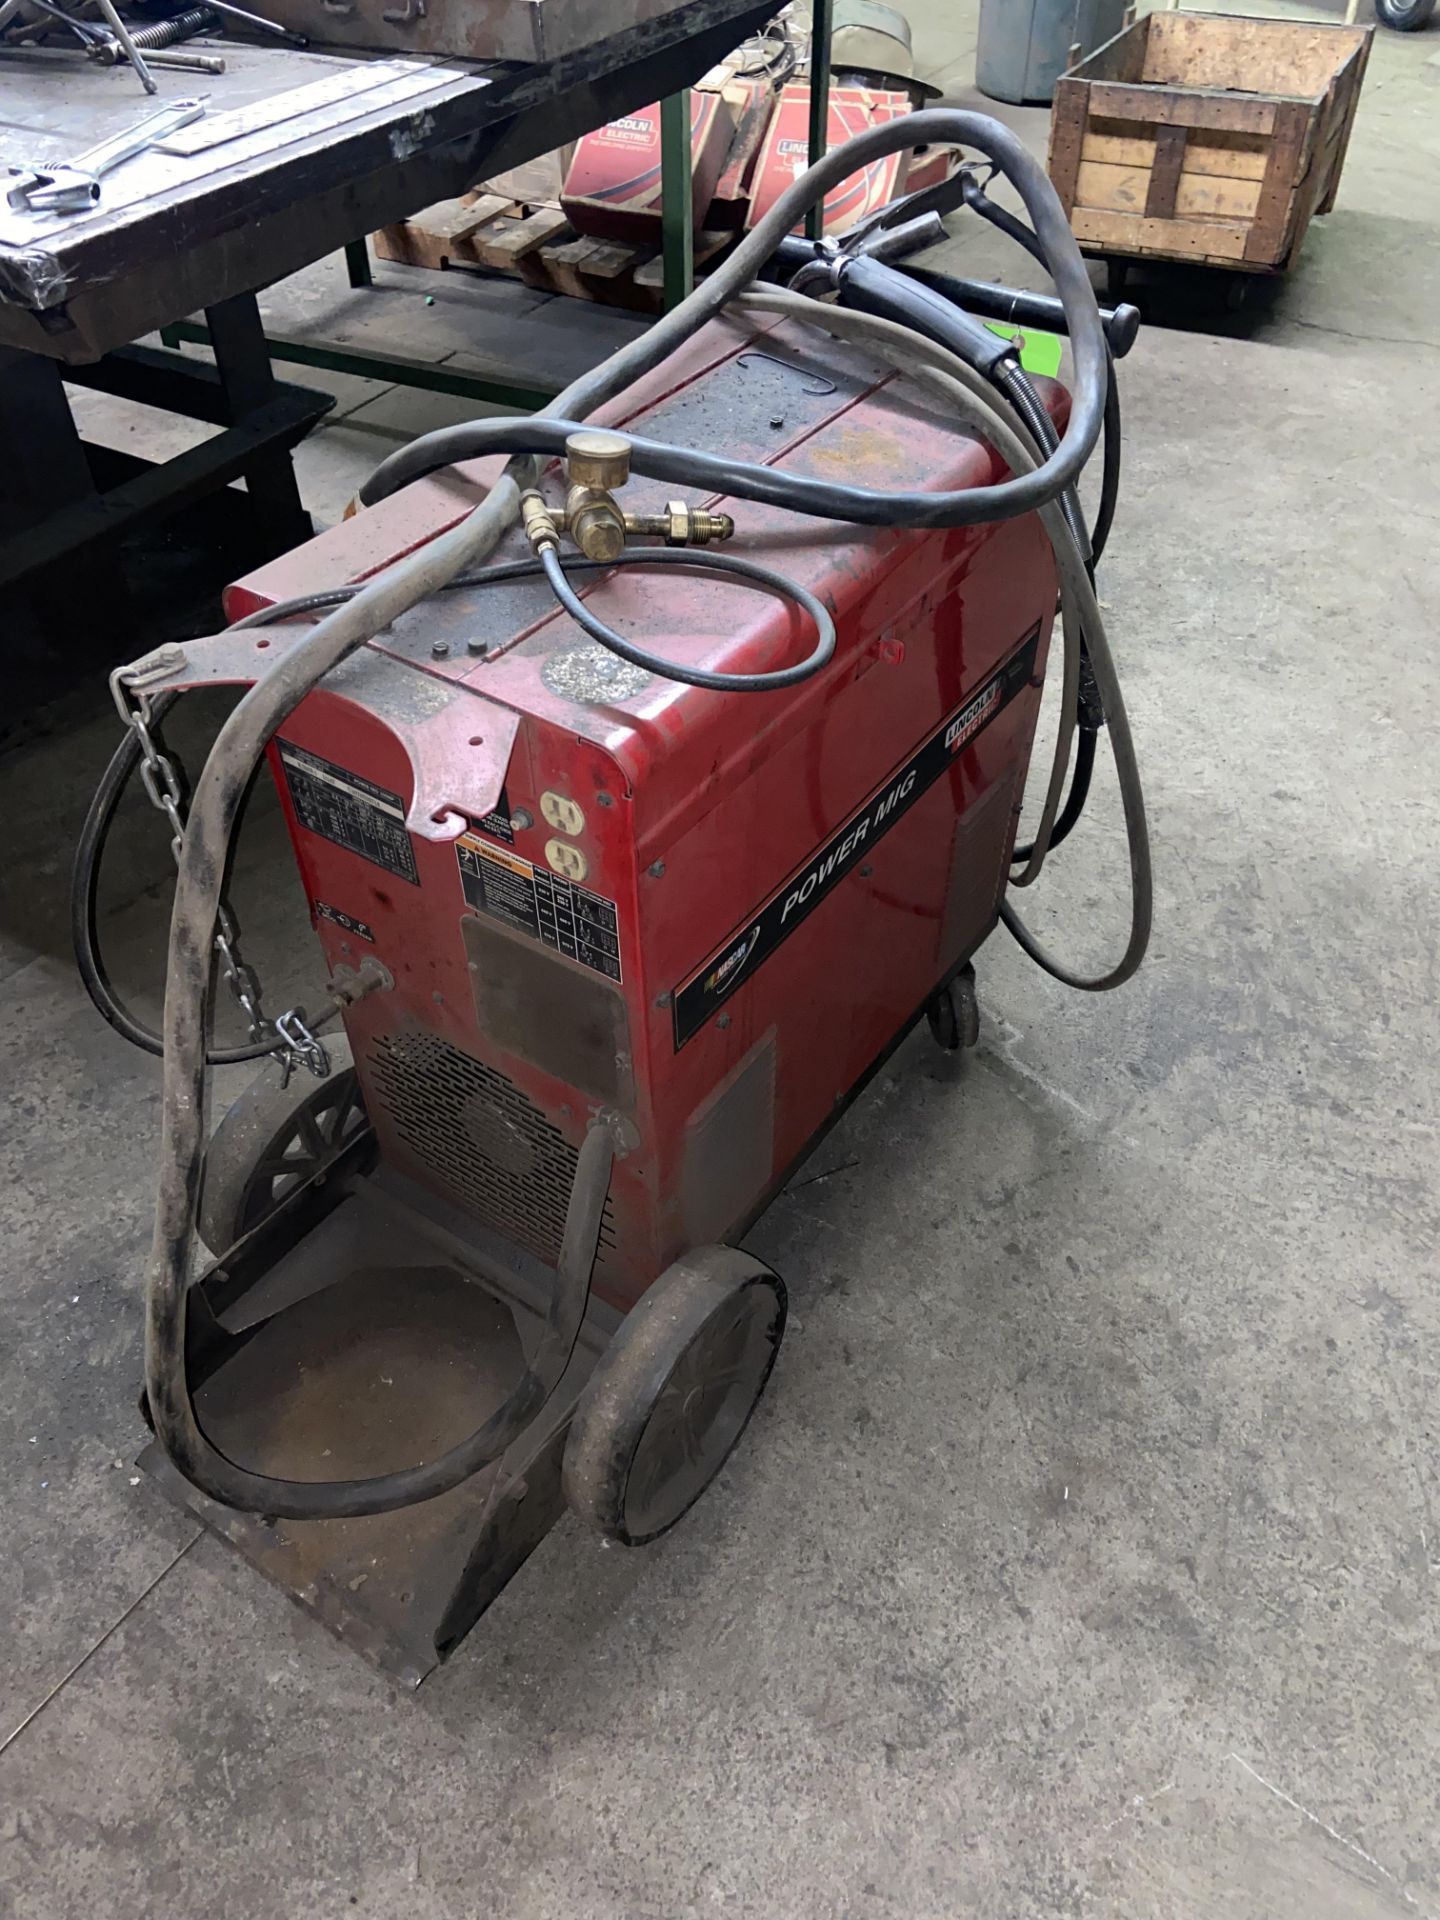 Lincoln Electric Power Mig 350MP Welder, S/N K2403-1 11147 U1070703714, Mounted on Portable Frame - Image 3 of 4